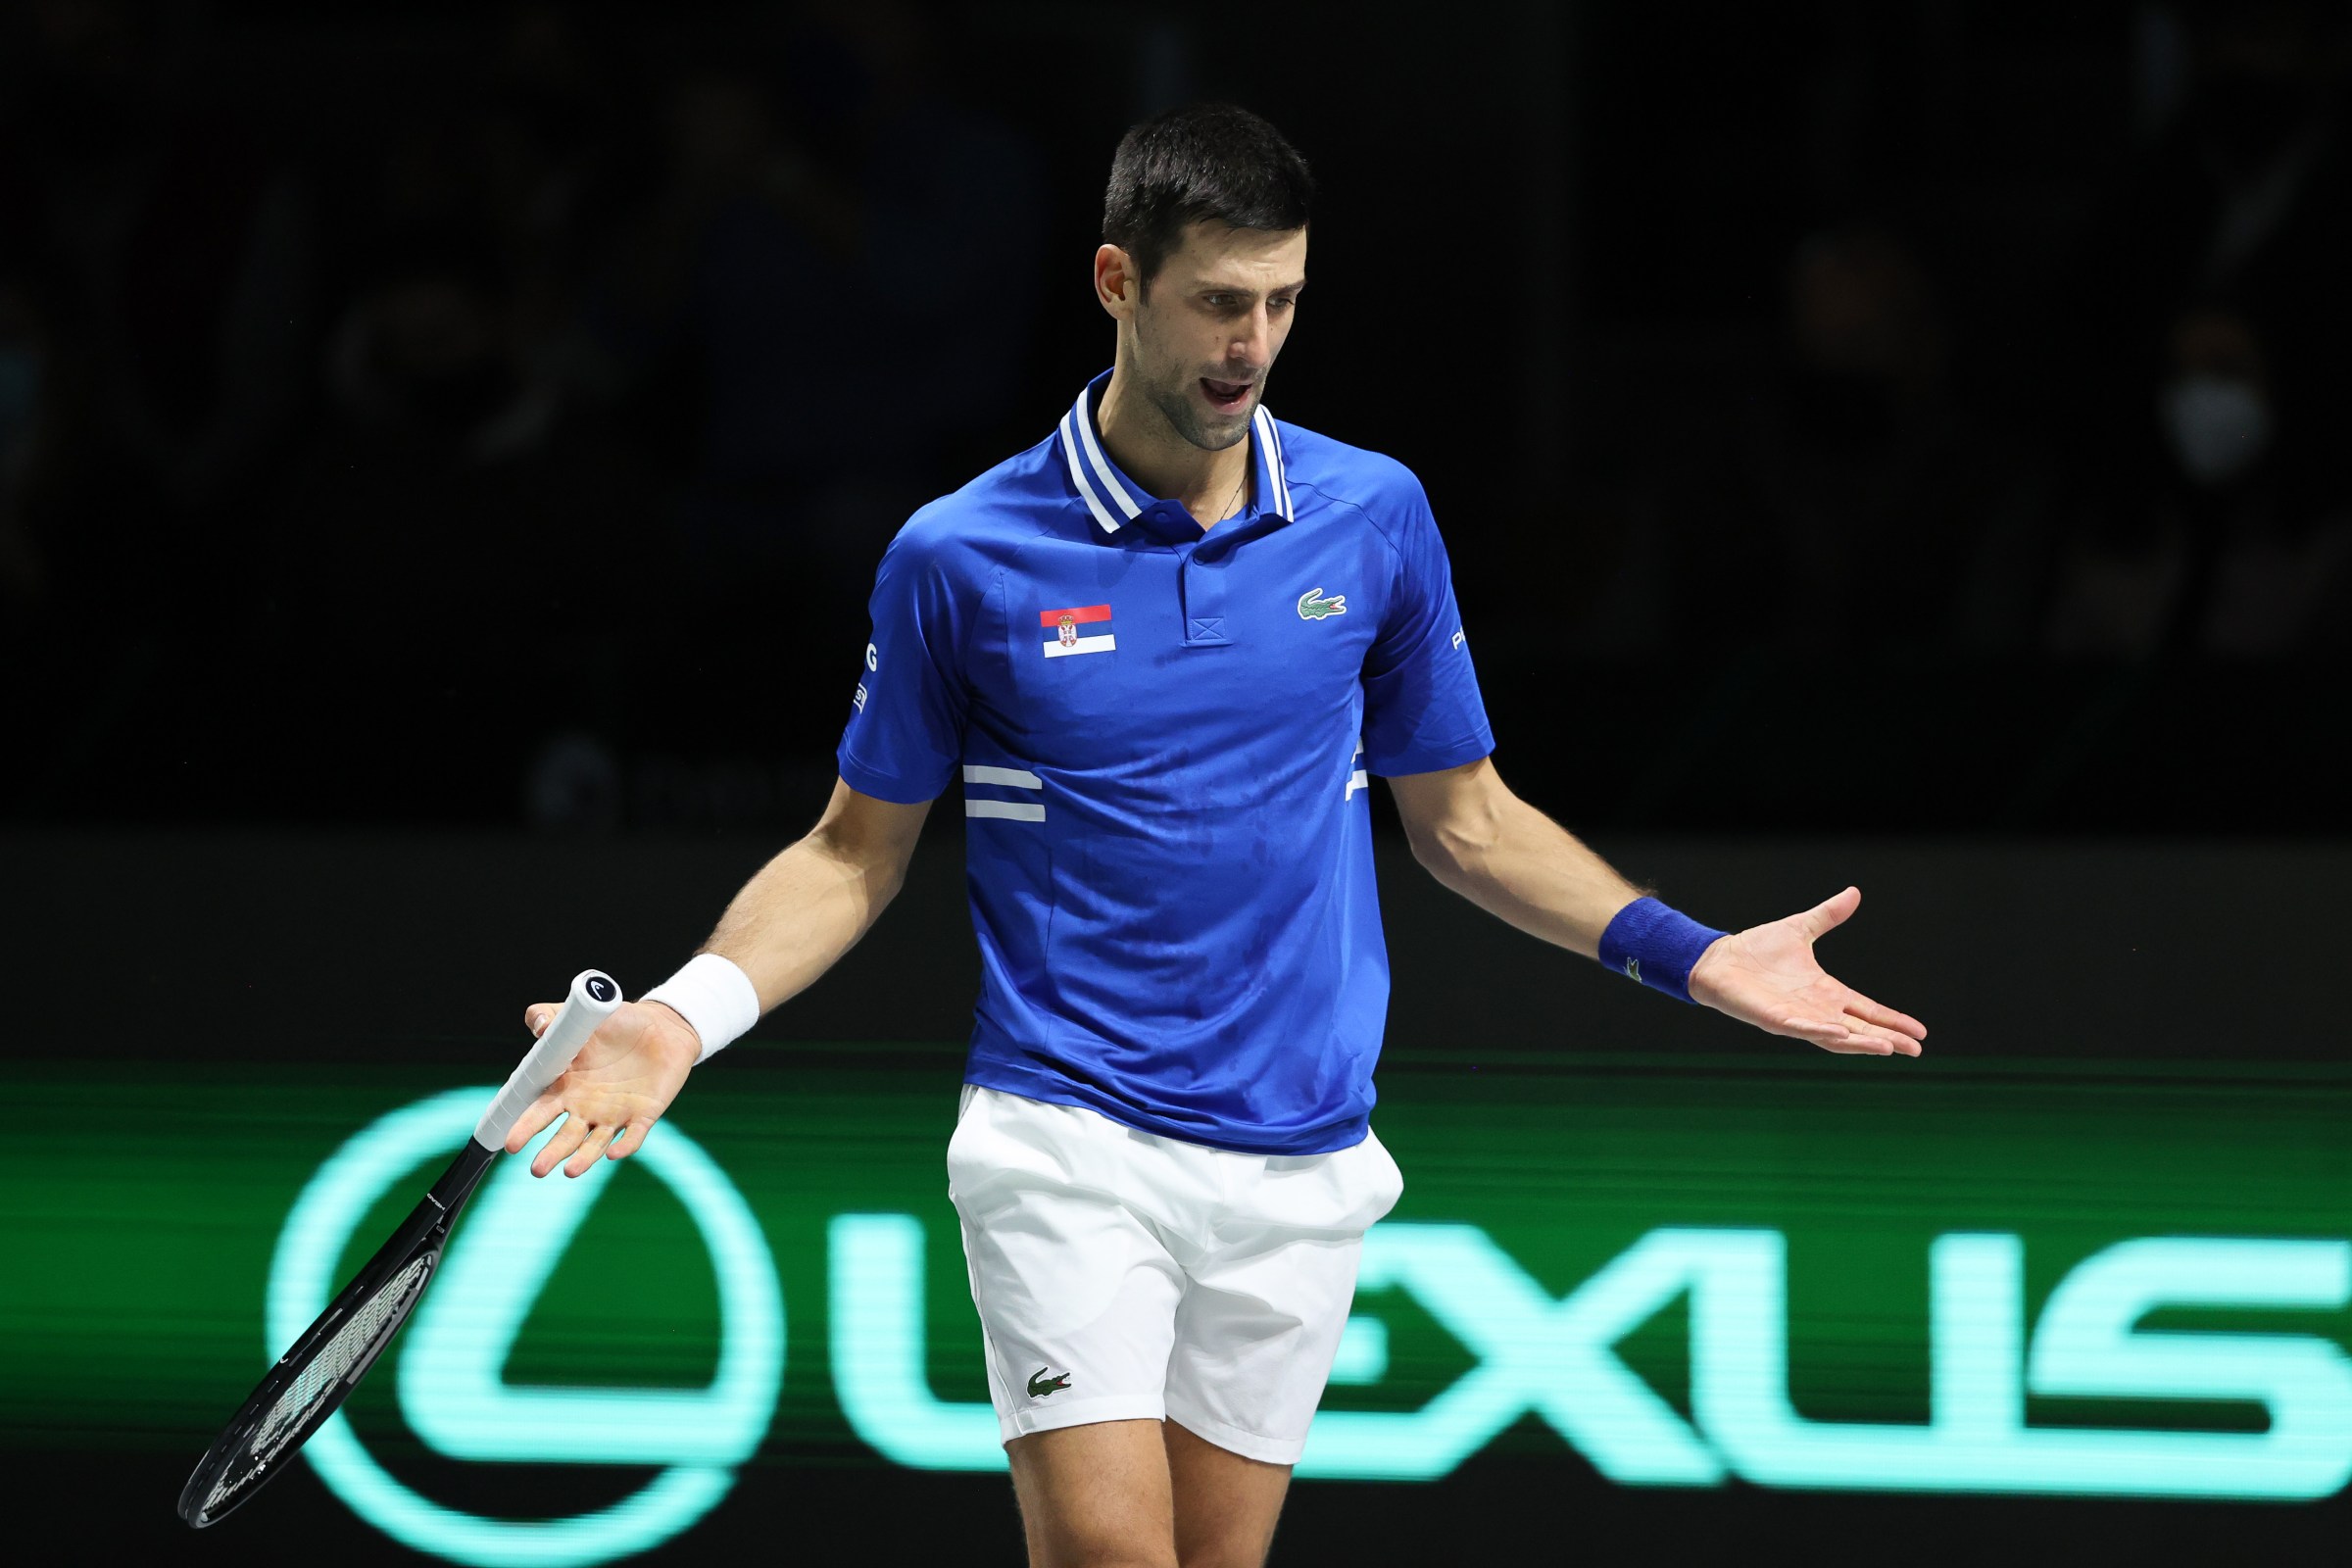 Novak Djokovic of Serbia reacts during the Davis Cup semi final against Marin Cilic of Croatia at Madrid Arena on December 03, 2021 in Madrid, Spain.